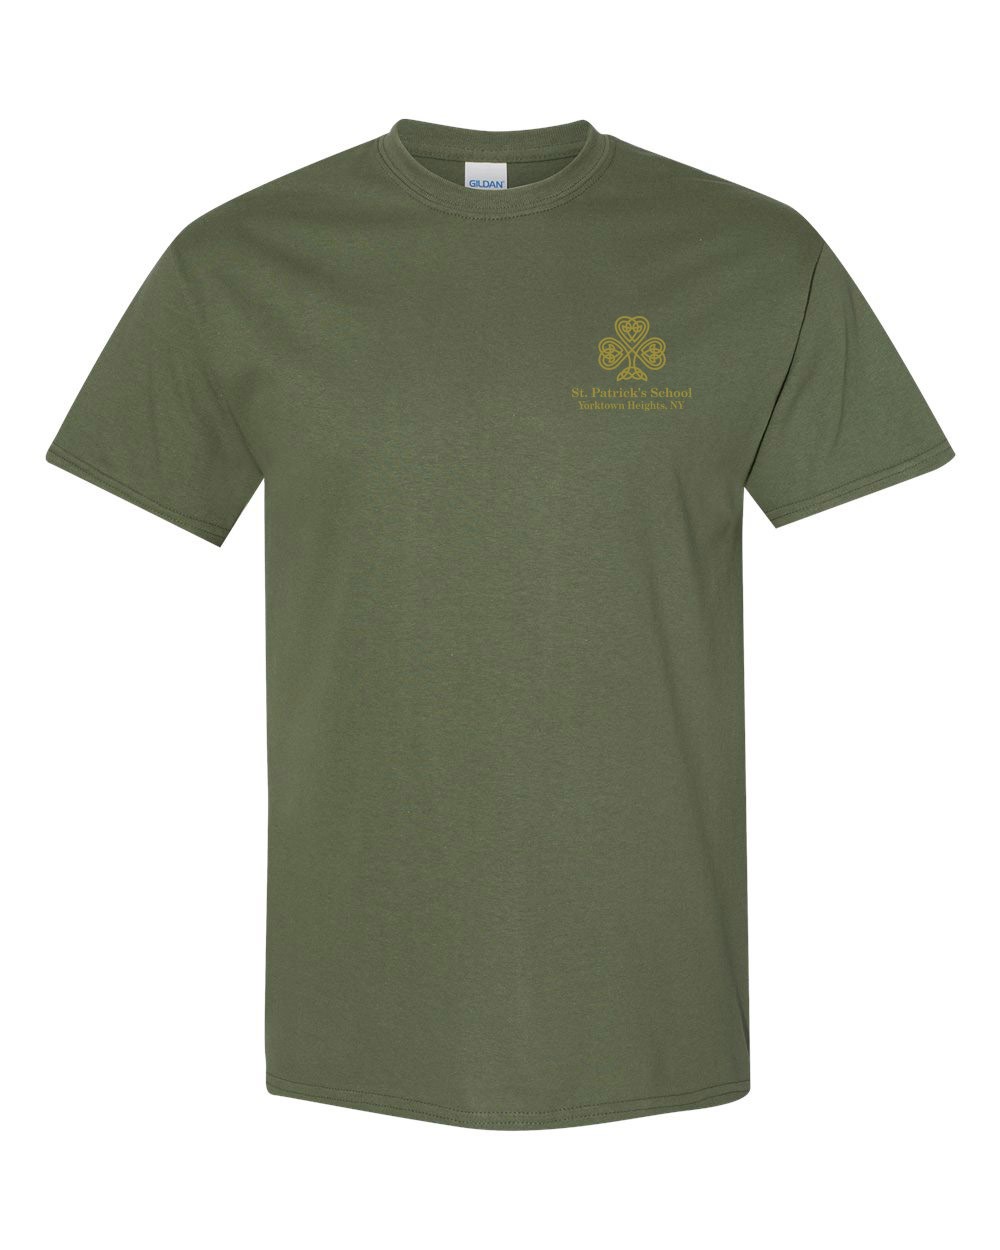 SPS S/S Spirit T-Shirt w/ Left Crest Gold Logo - Please Allow 2-3 Weeks for Delivery